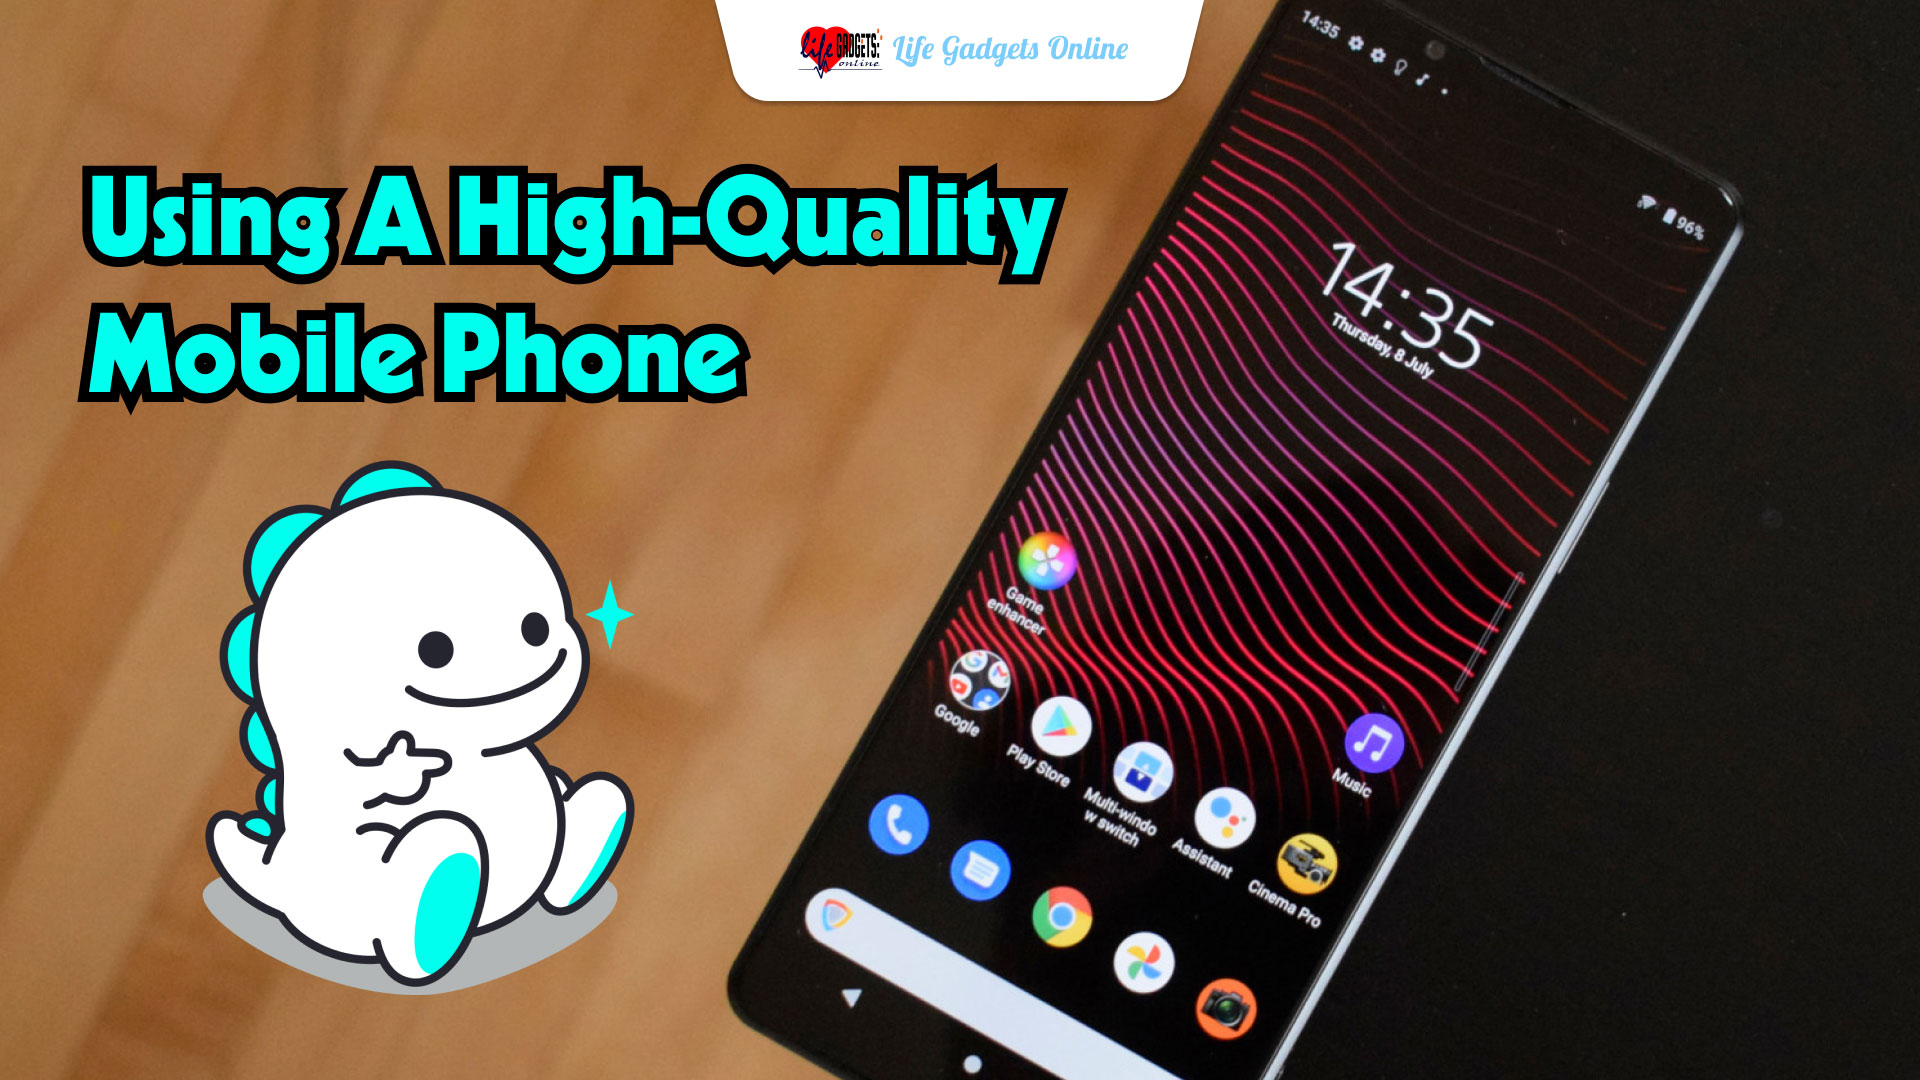 Using a high-quality mobile phone